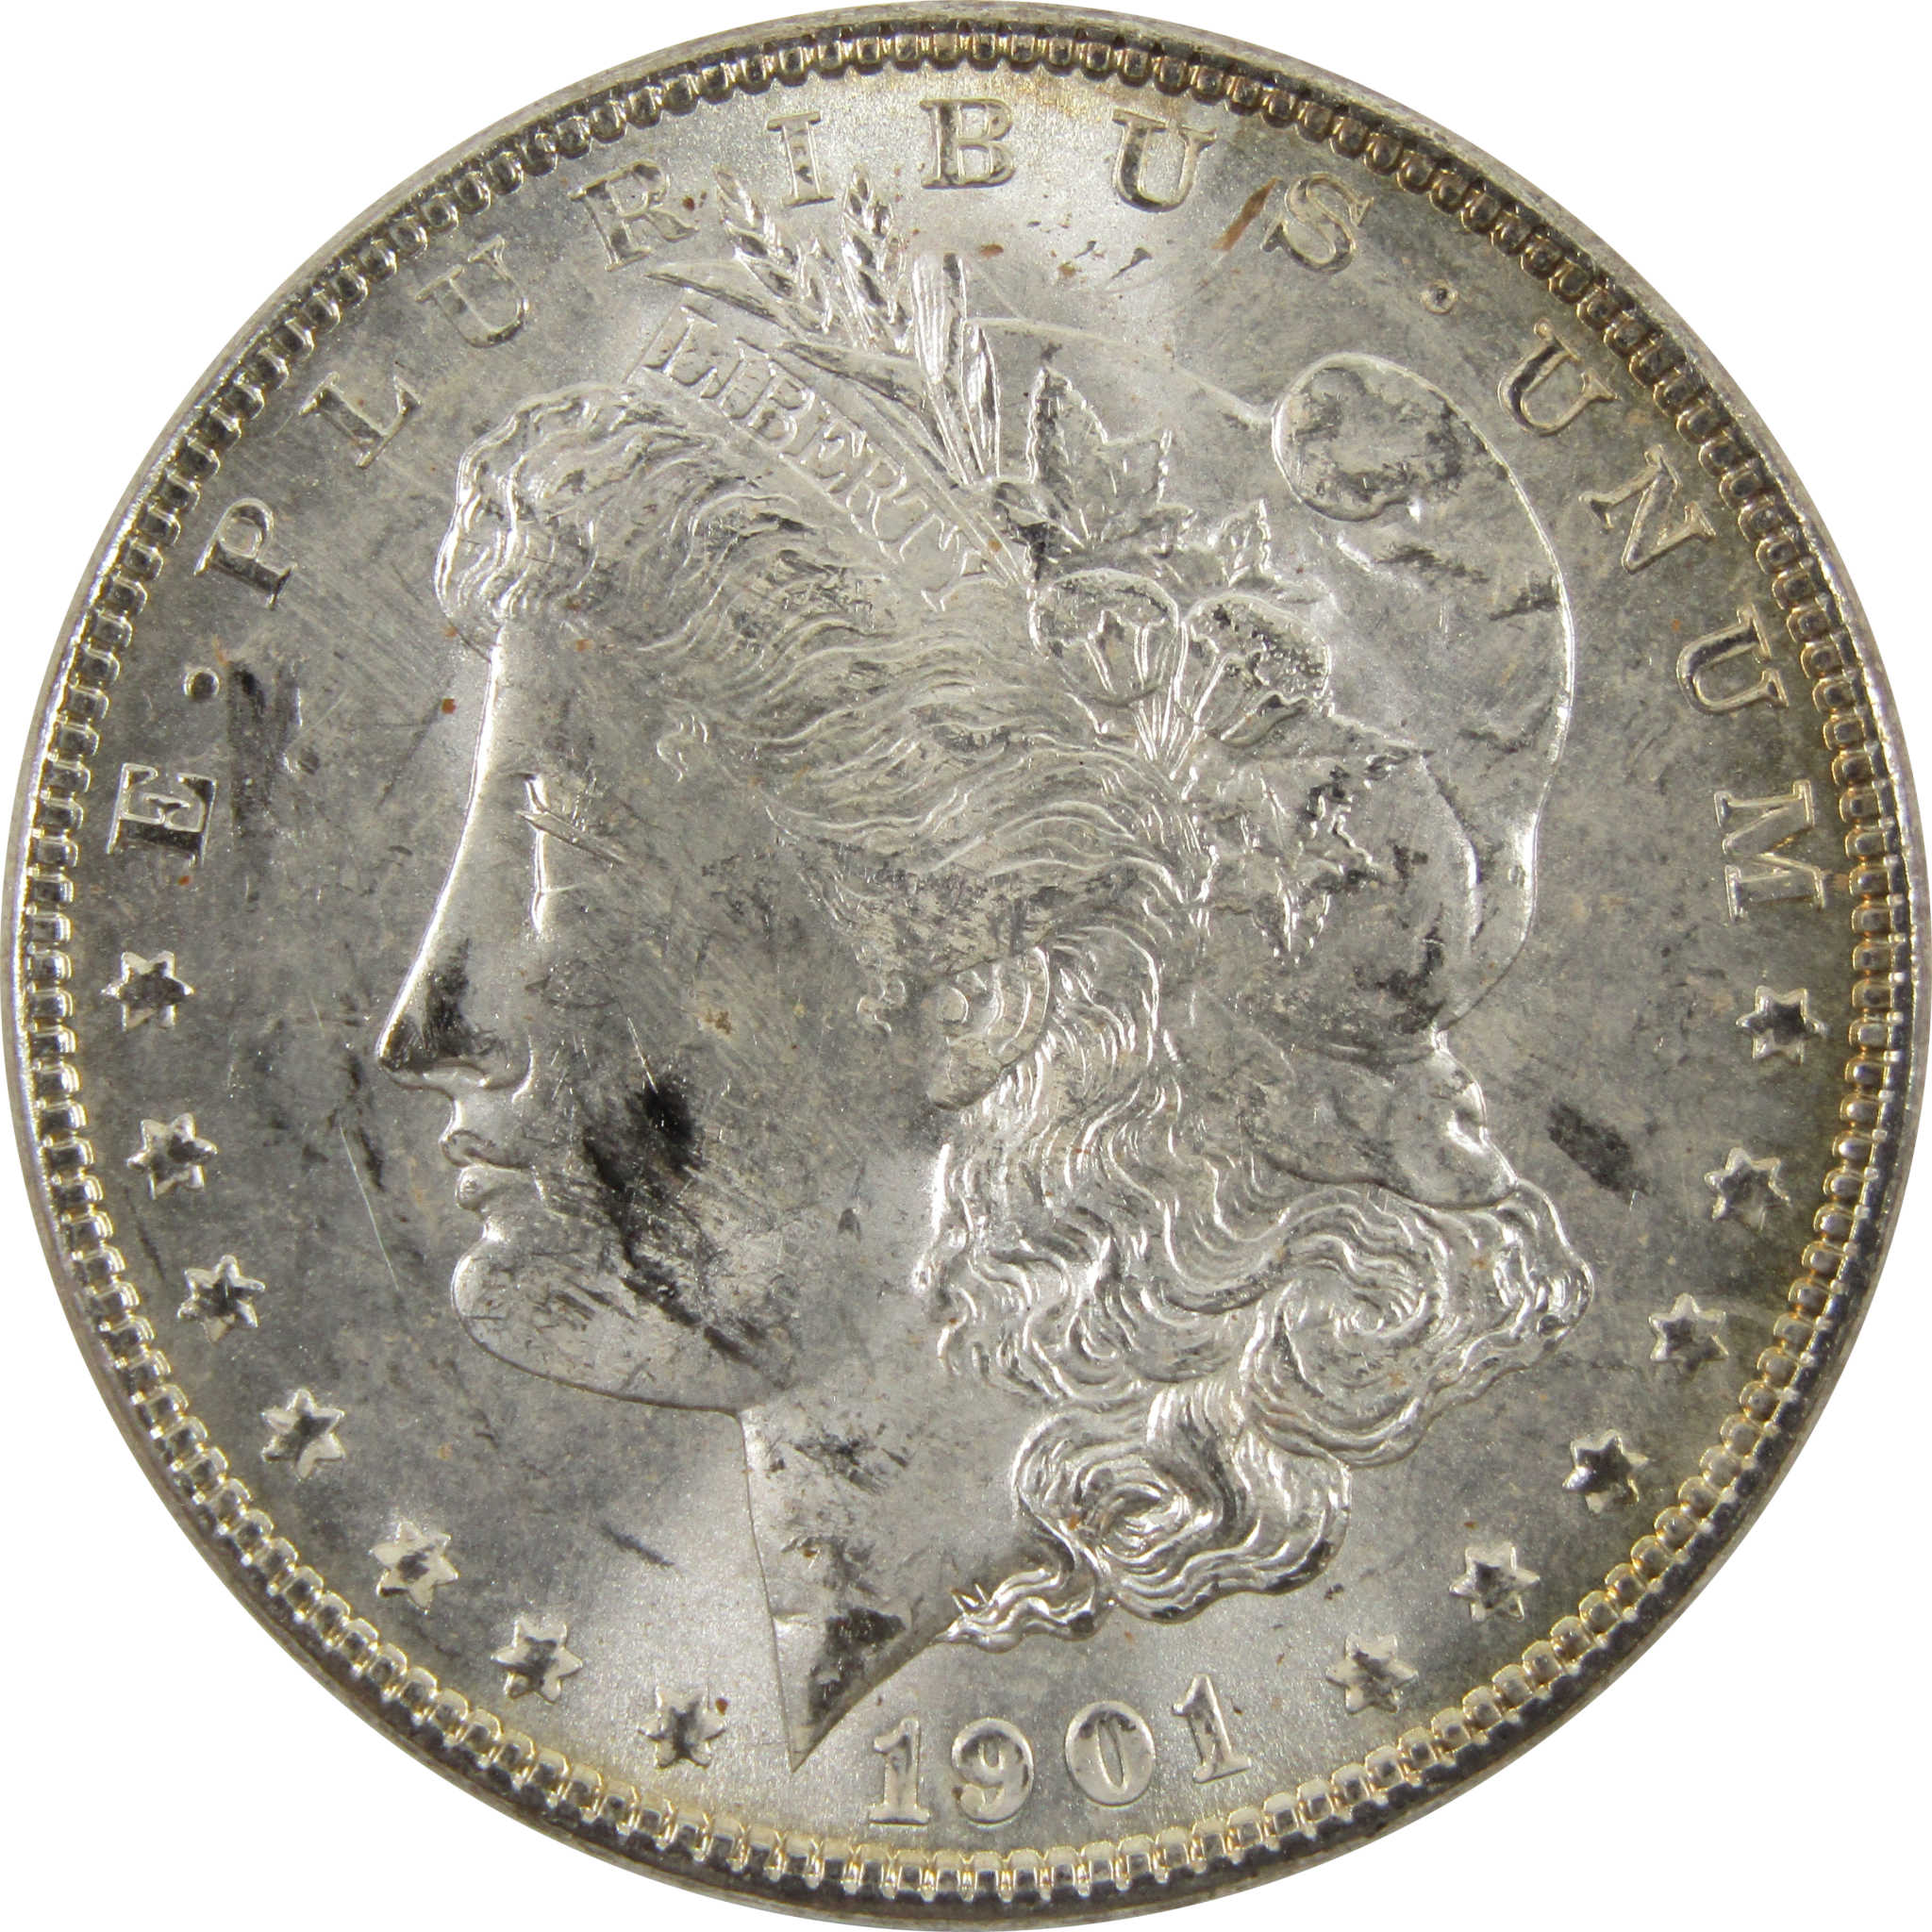 1901 O Morgan Dollar Uncirculated Details 90% Silver $1 SKU:I10461 - Morgan coin - Morgan silver dollar - Morgan silver dollar for sale - Profile Coins &amp; Collectibles